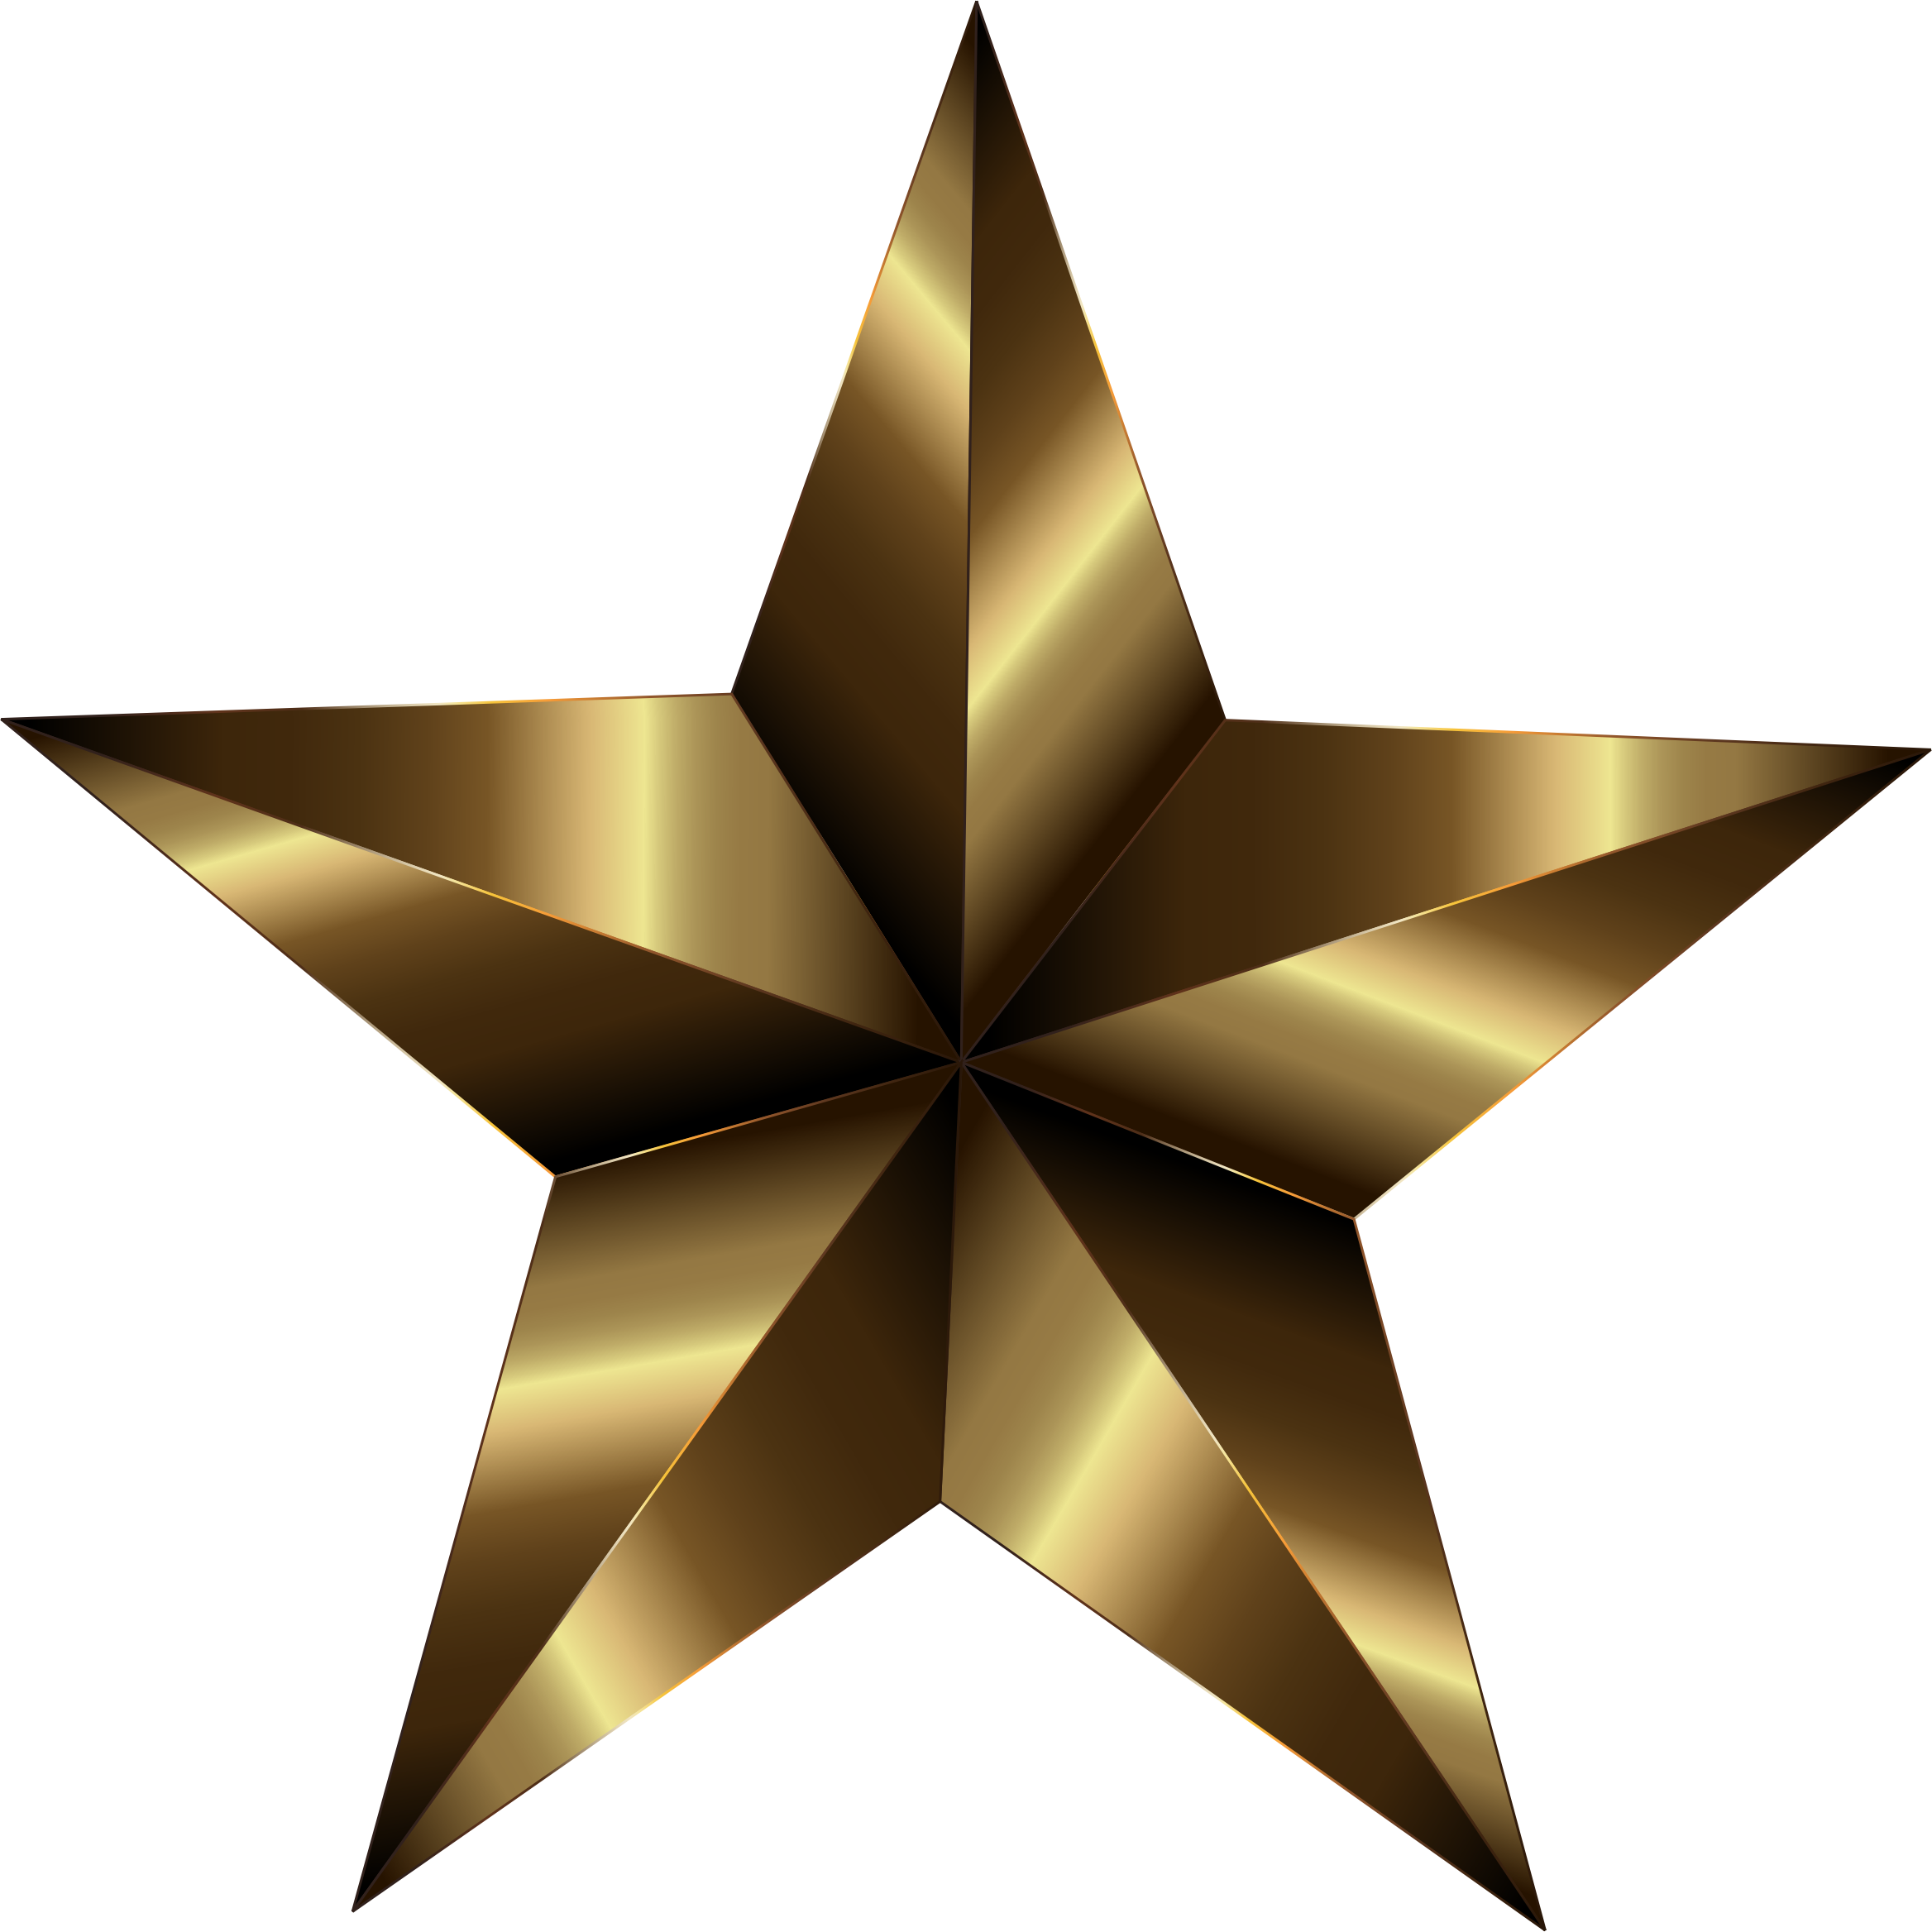 Prismatic Star 20 By @gdj, Prismatic Star 20, On @openclipart - Star Gold Metallic Png (2336x2336)